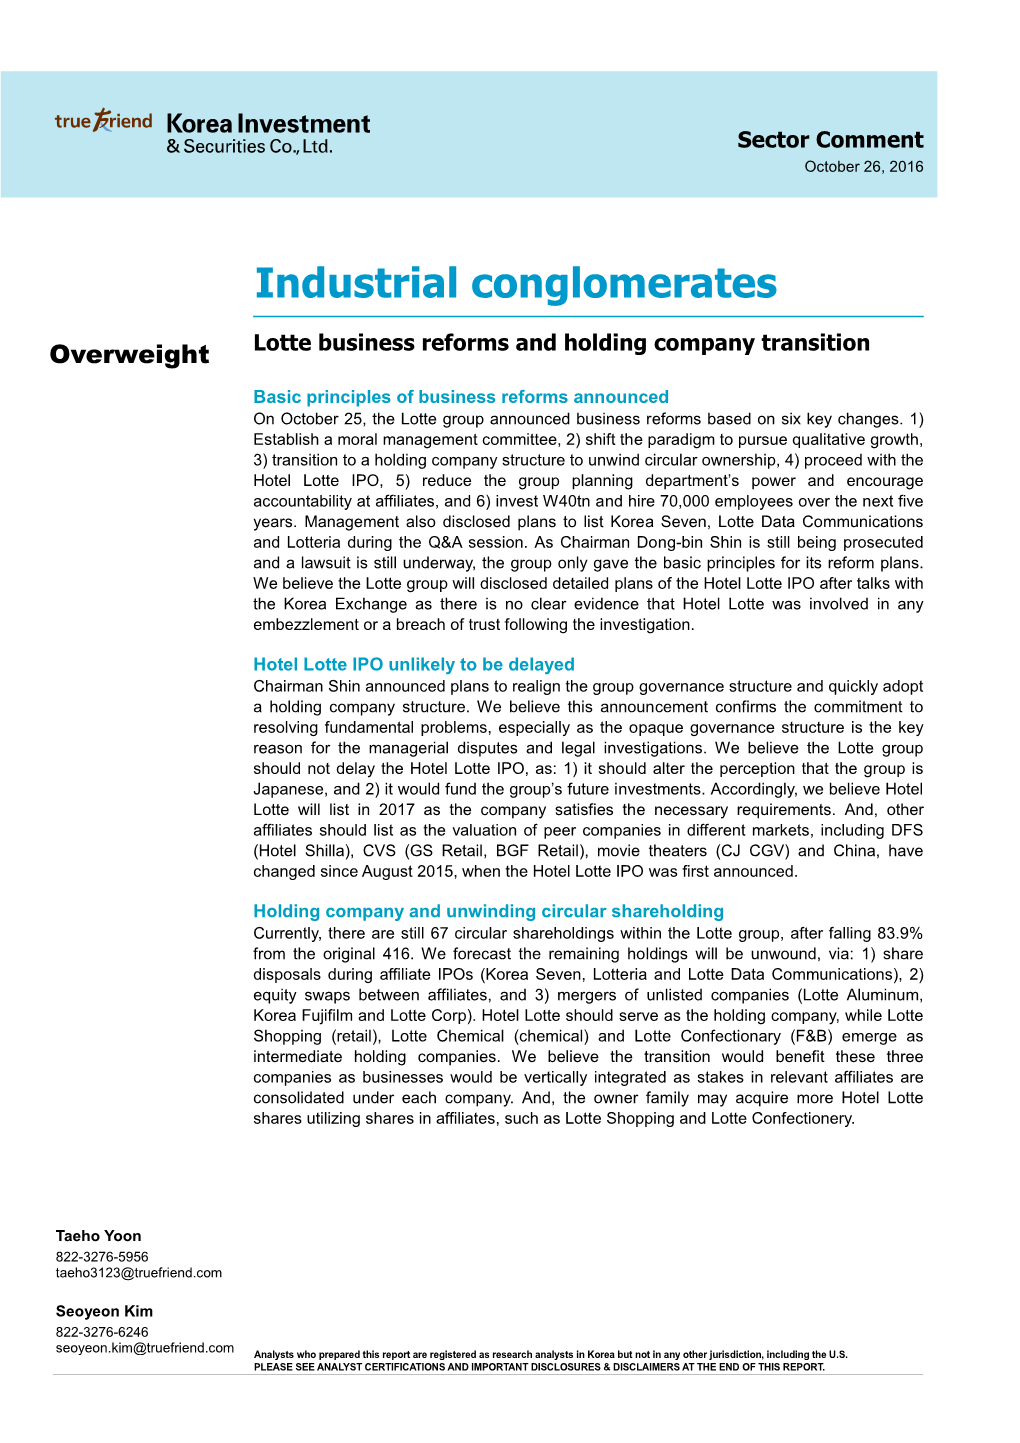 Industrial Conglomerates